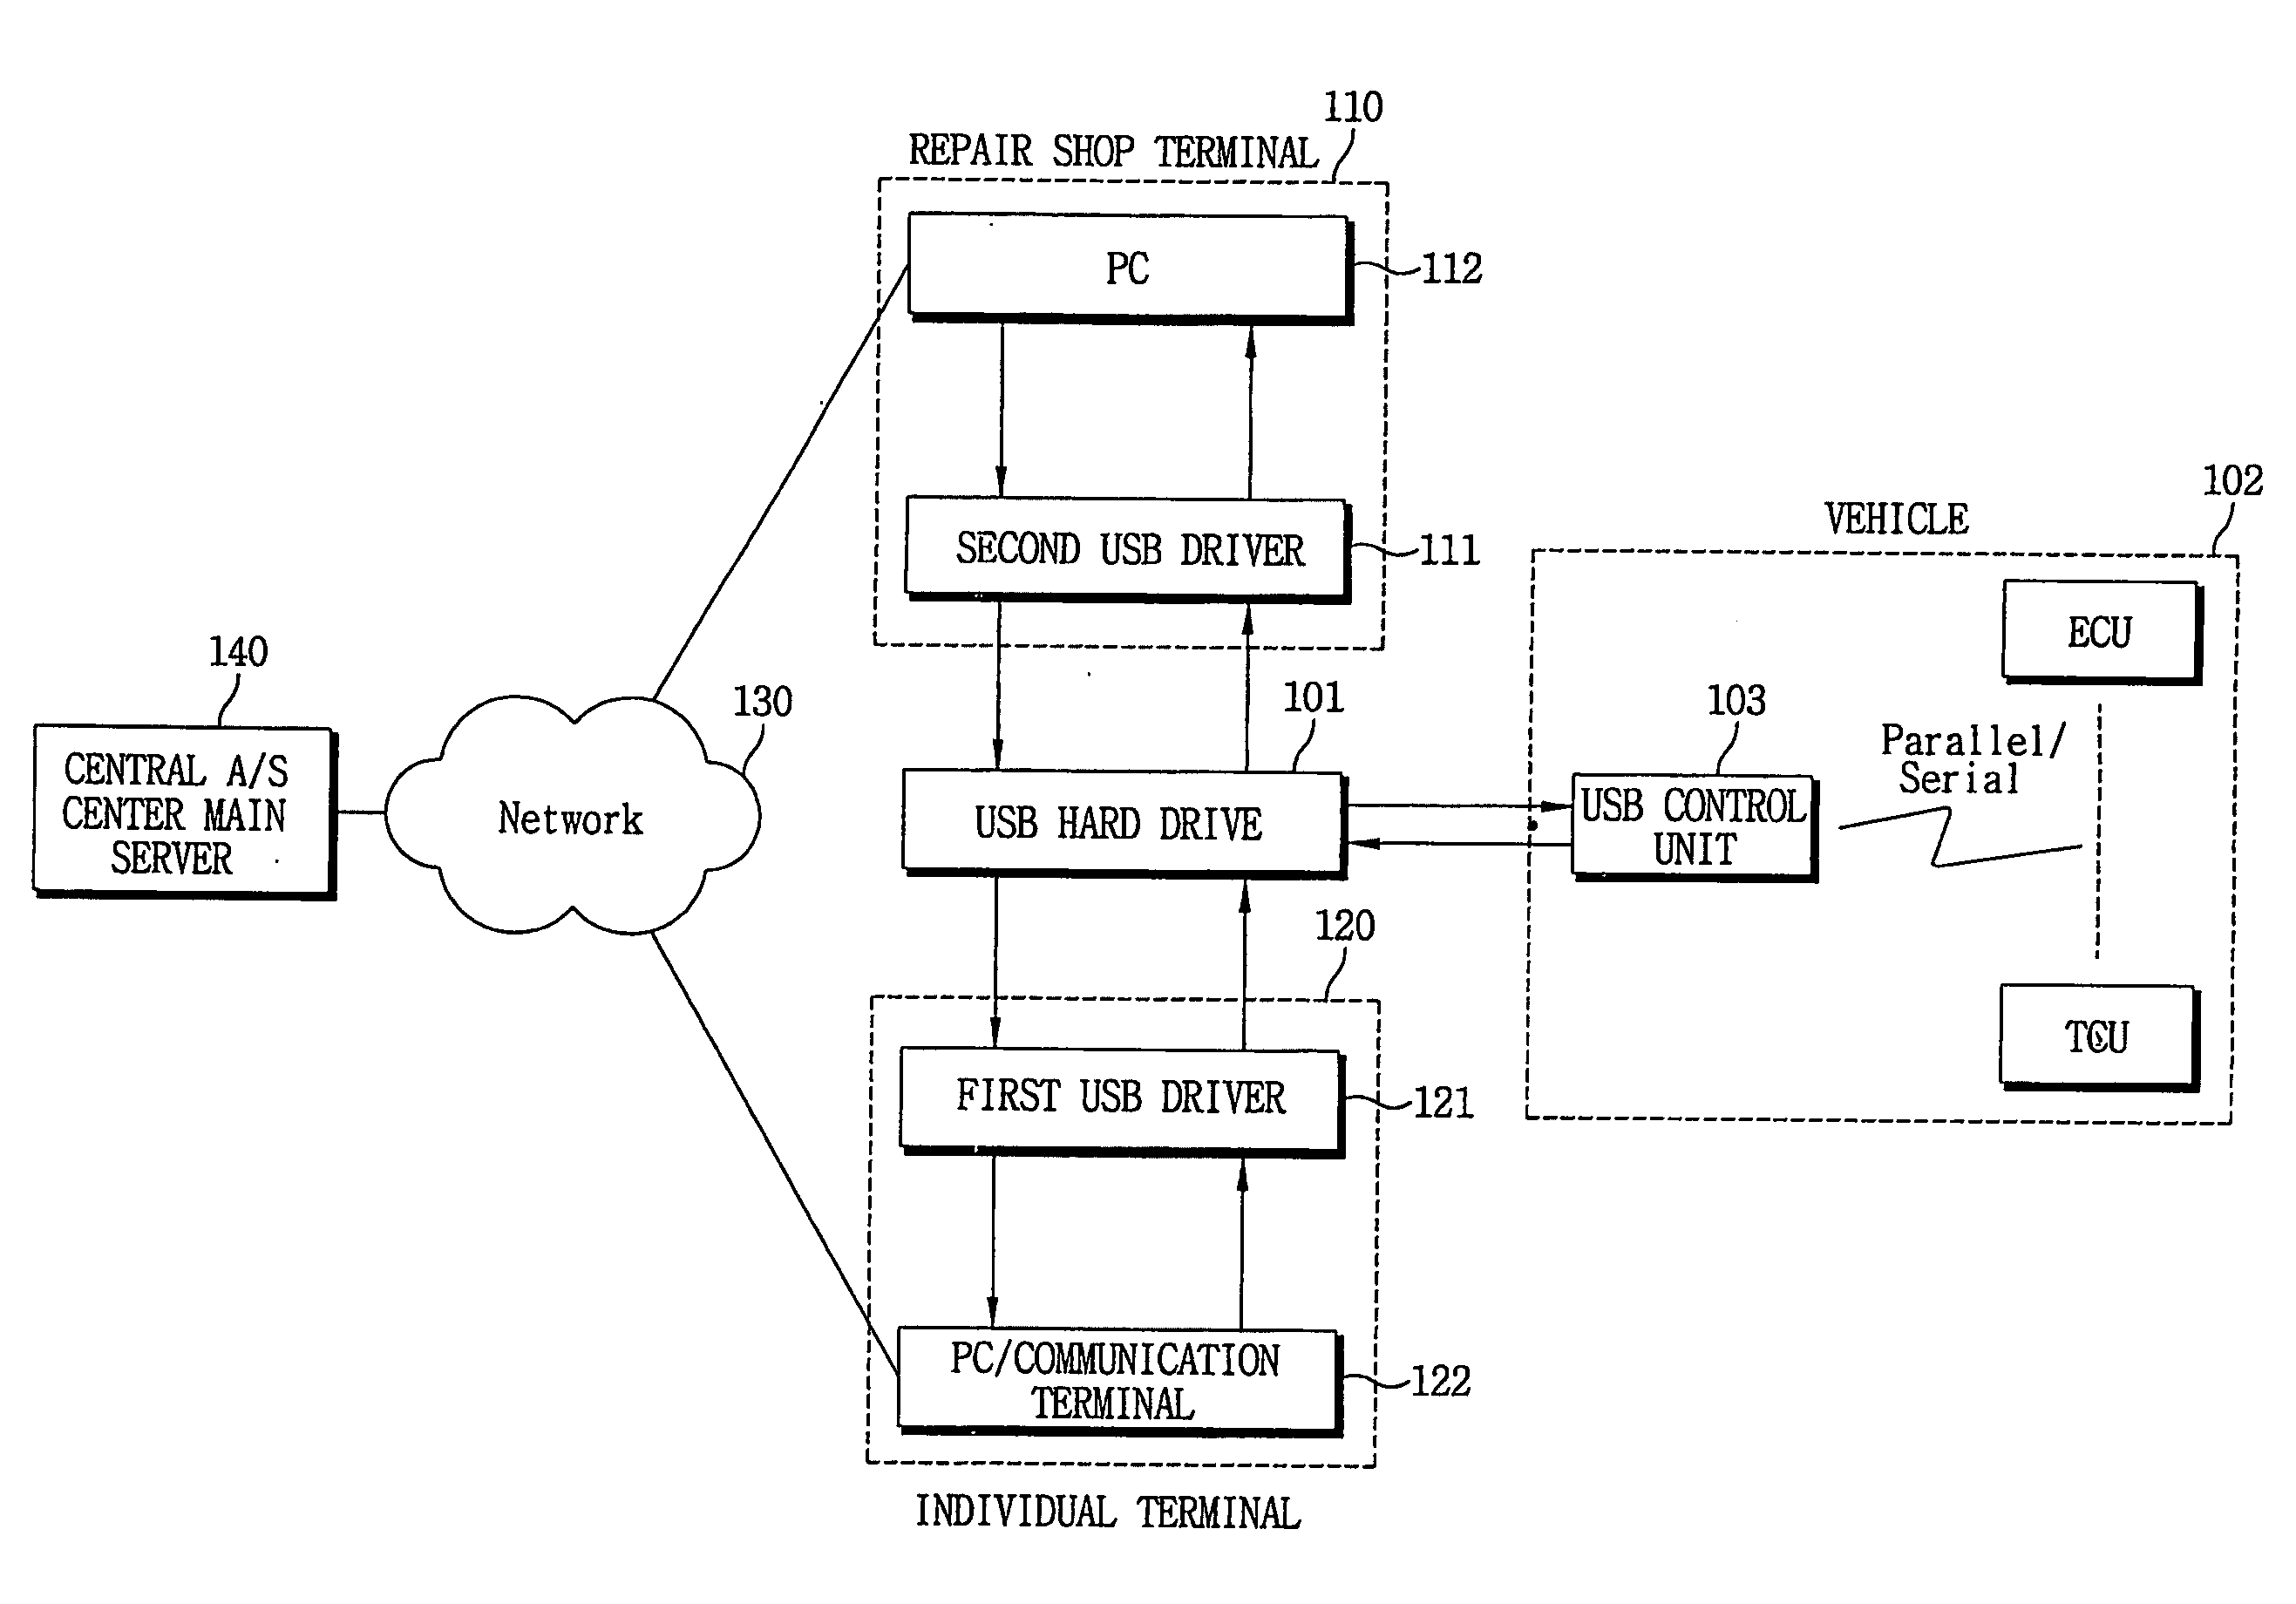 System for collecting vehicle data and diagnosticating the vehicle using USB hard drive